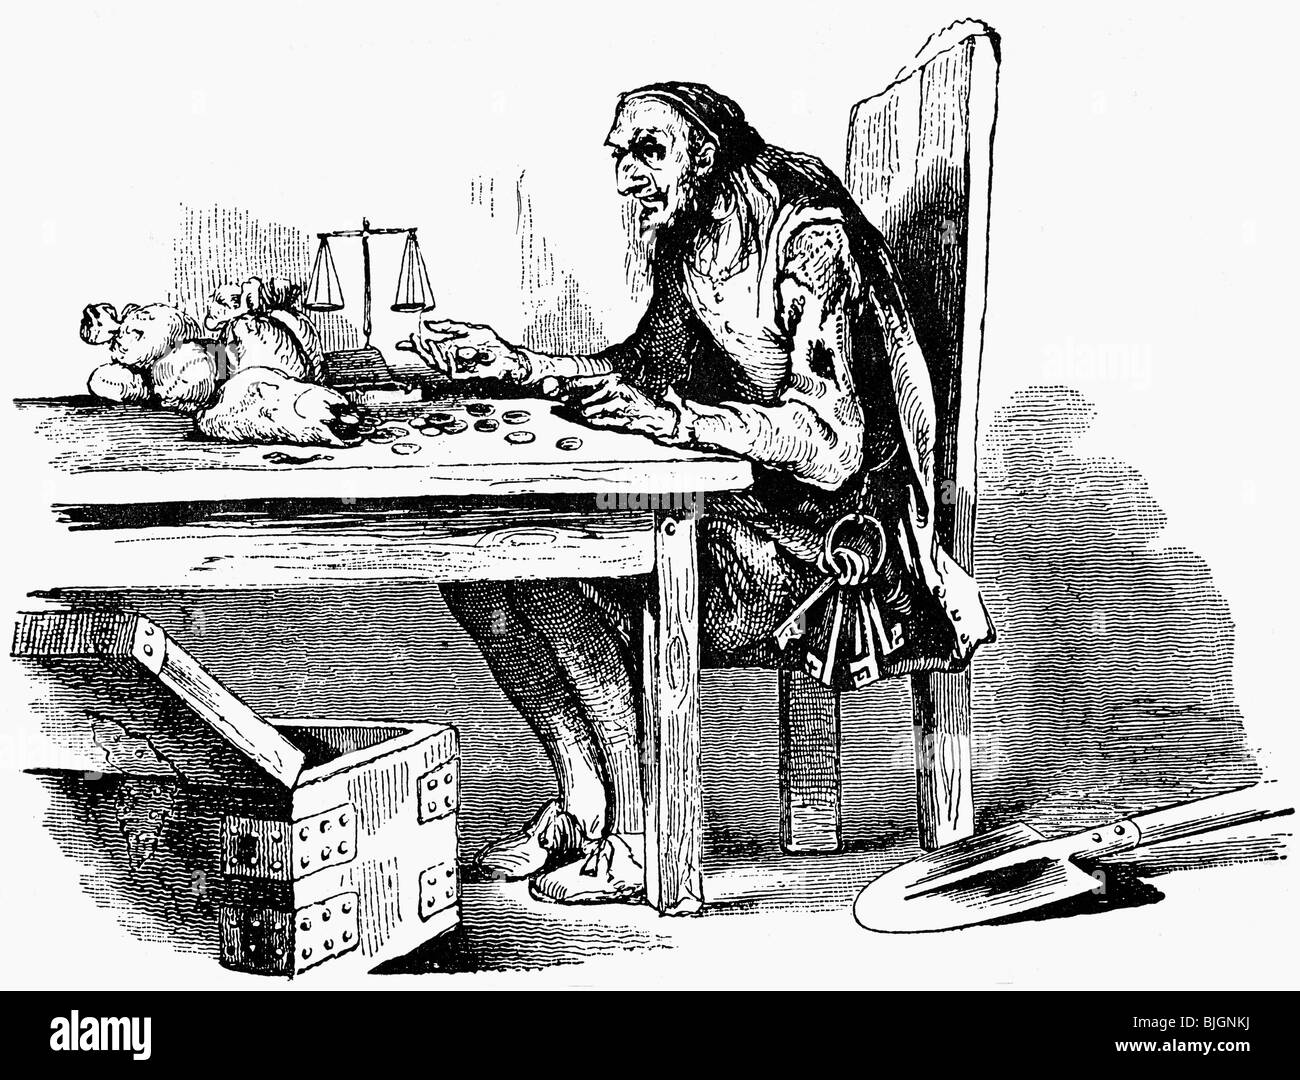 Moliere, 15.1.1622 - 17.2.1673, French author / writer, works, play 'The Miser' ('L'Avare'), 1668, illustration, wood engraving by Tony Johannot, 1854, , Stock Photo